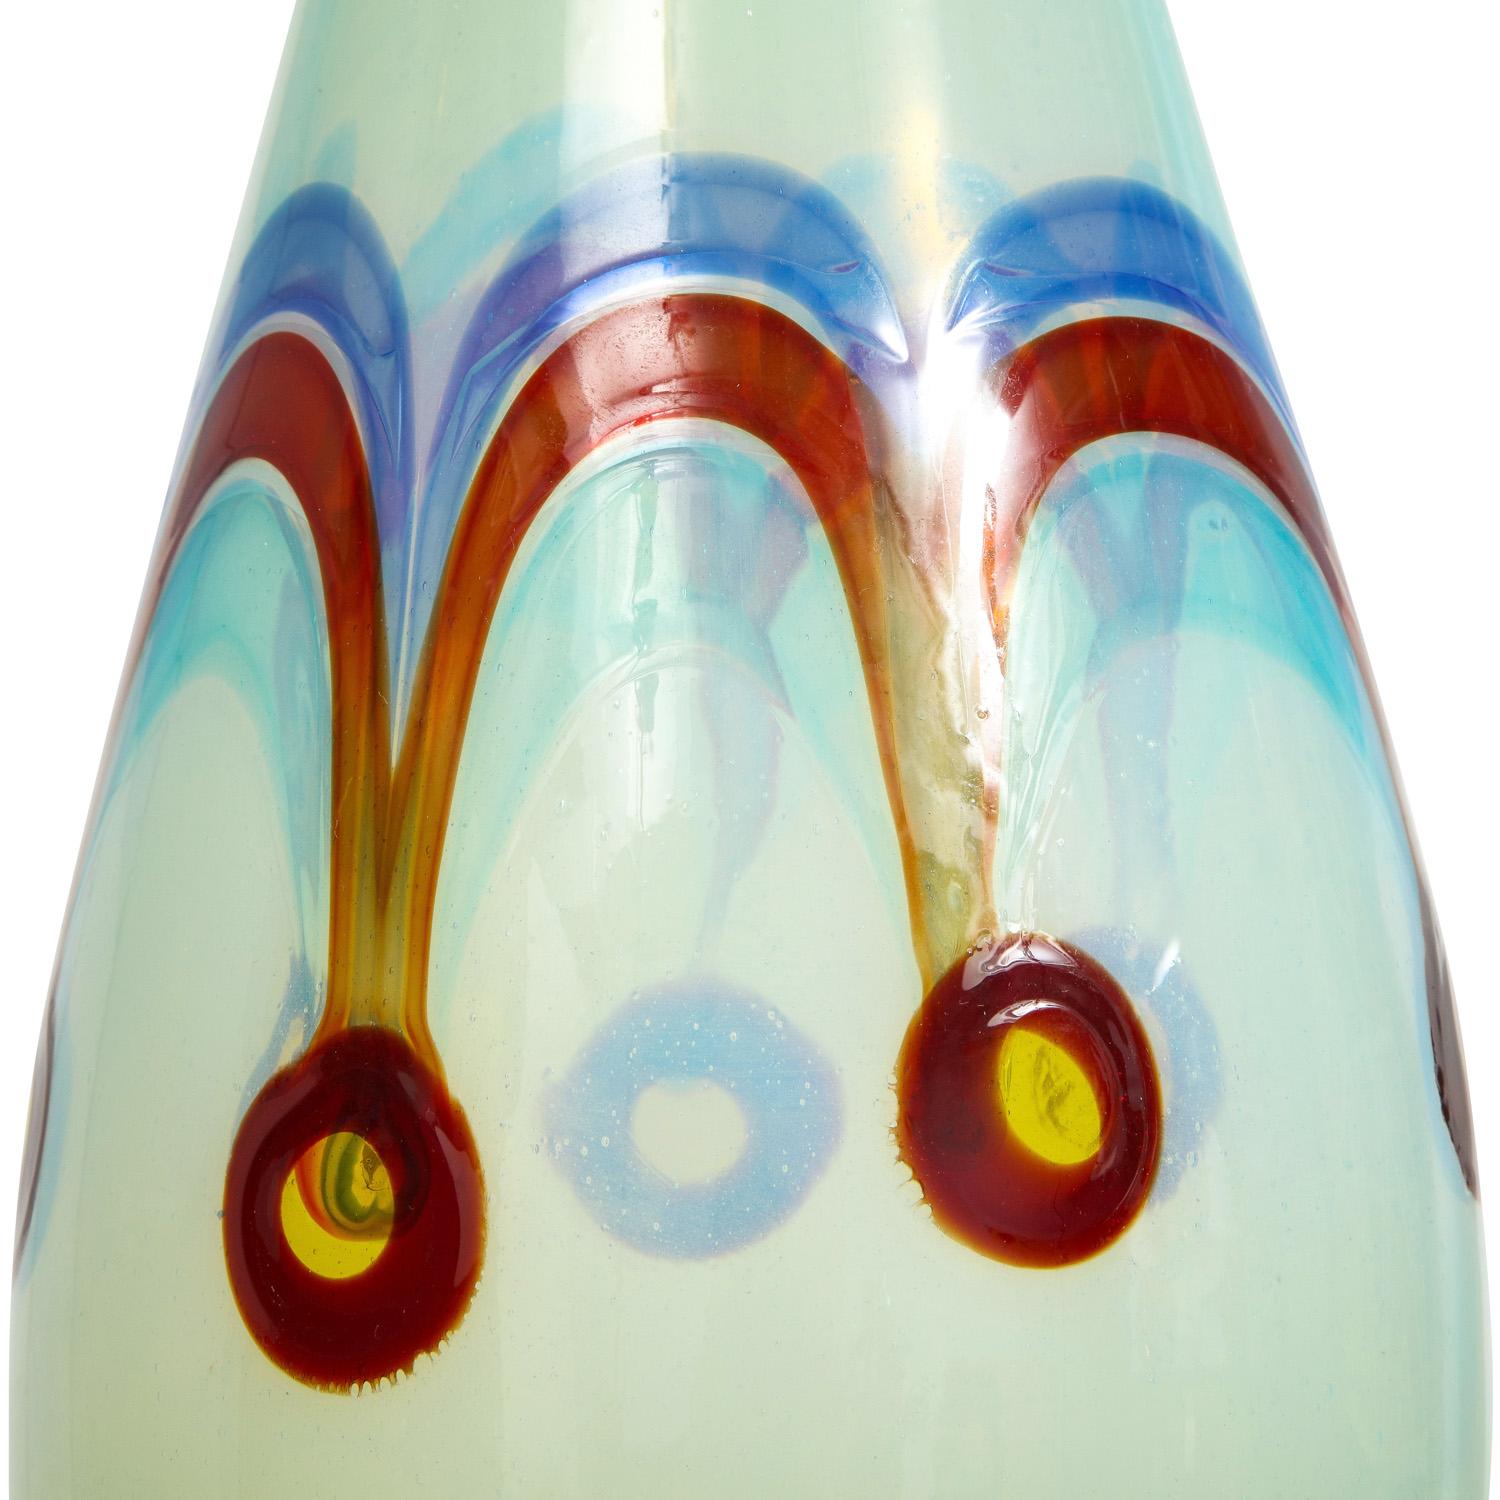 Mid-Century Modern Anzolo Fuga Large Opalescent Pavone Vase, Italy, 1957-60